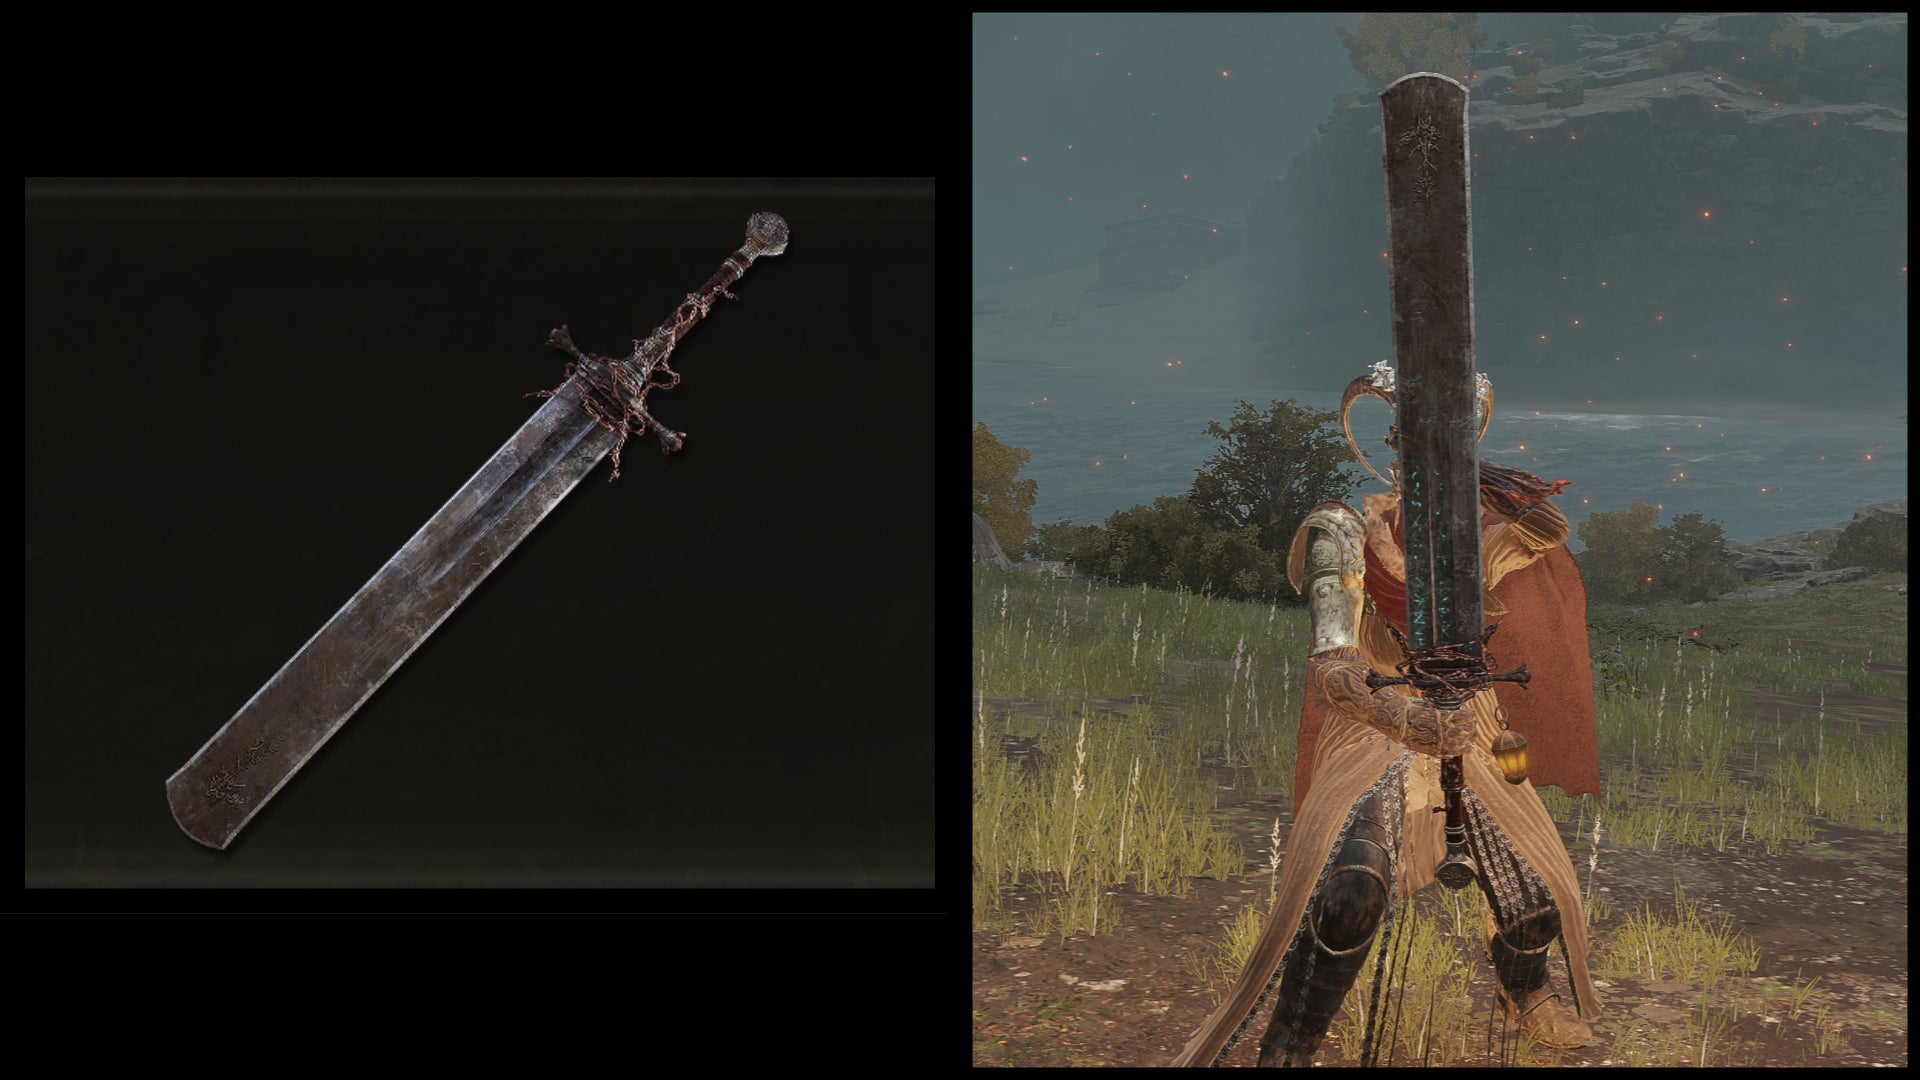 Left: an illustration of the Marais Executioner's Sword from Elden Ring. Right: the player character holding the same weapon against a Limgrave background.